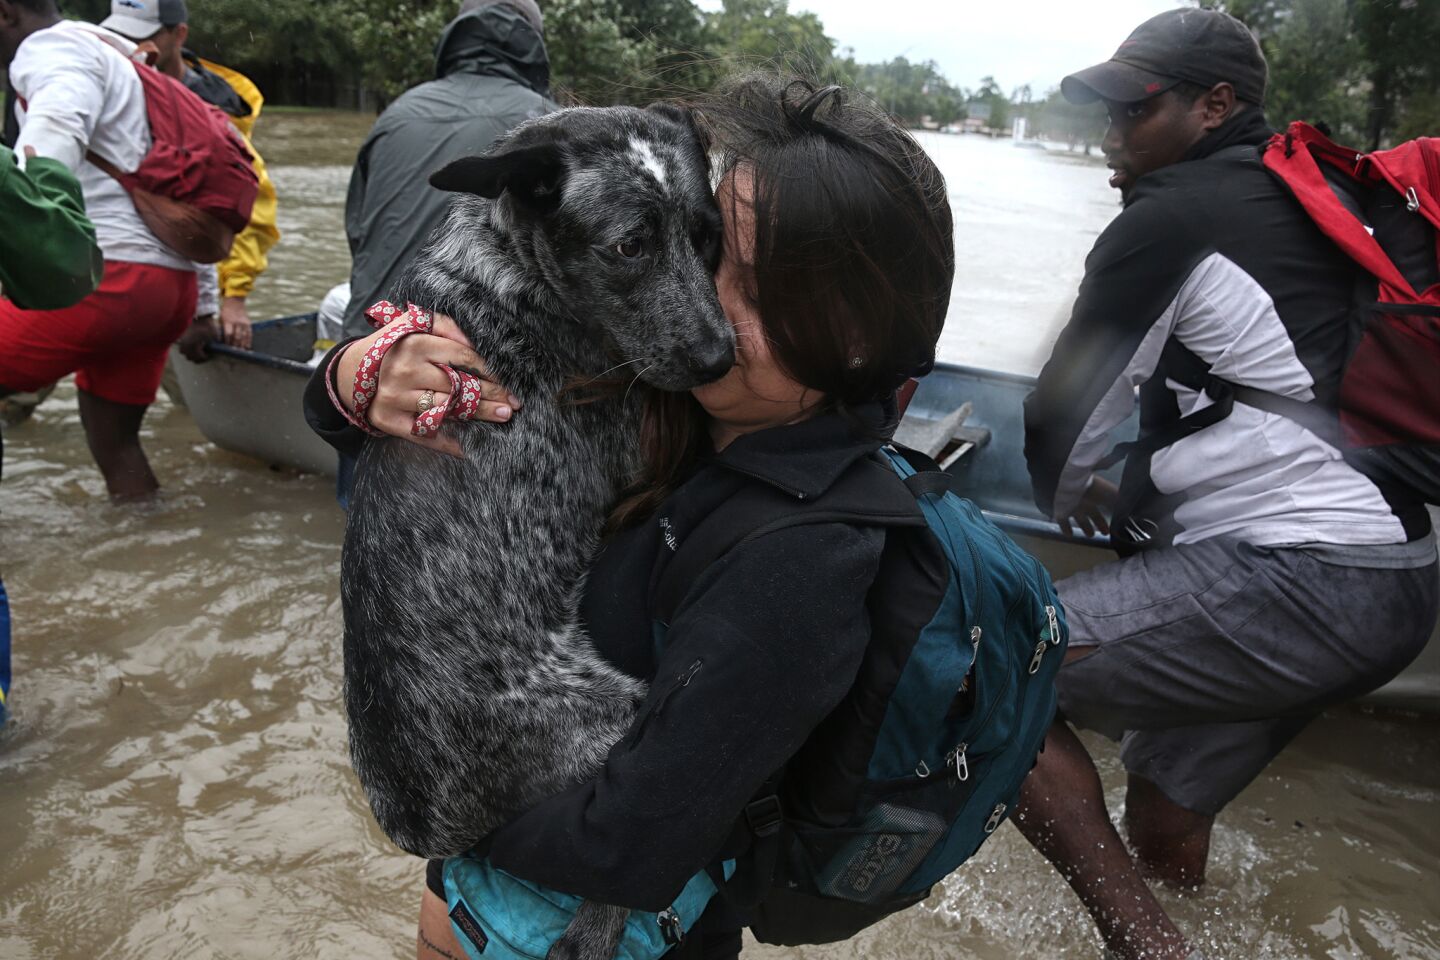 A woman carries a dog above the rising floodwaters near Addicks Reservoir.